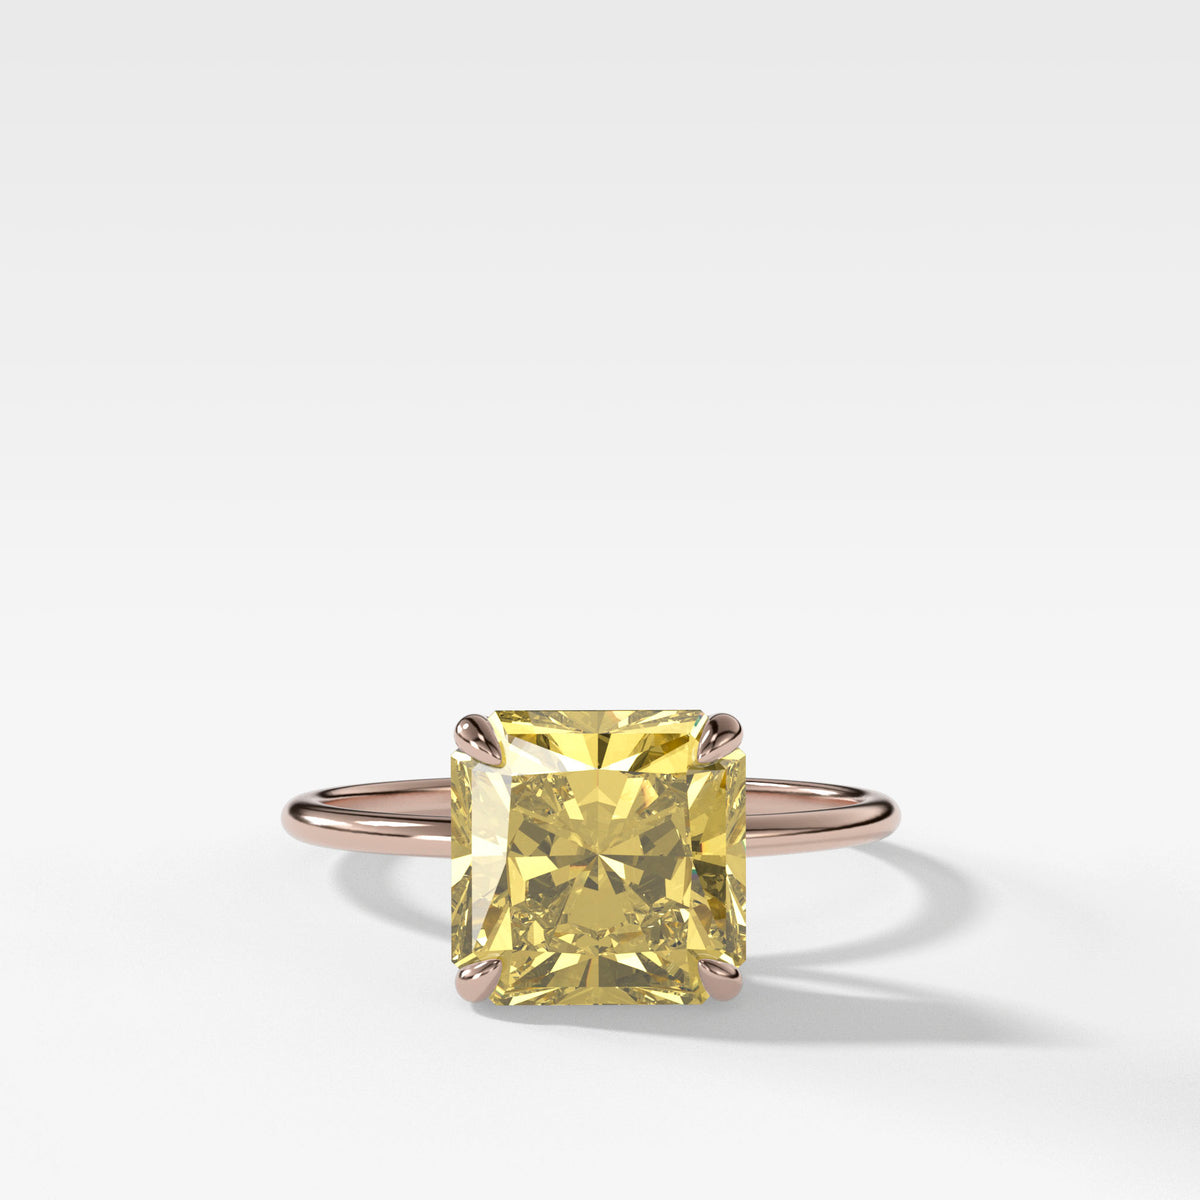 Thin + Simple Solitaire Engagement Ring With Canary Yellow Radiant Cut Diamond